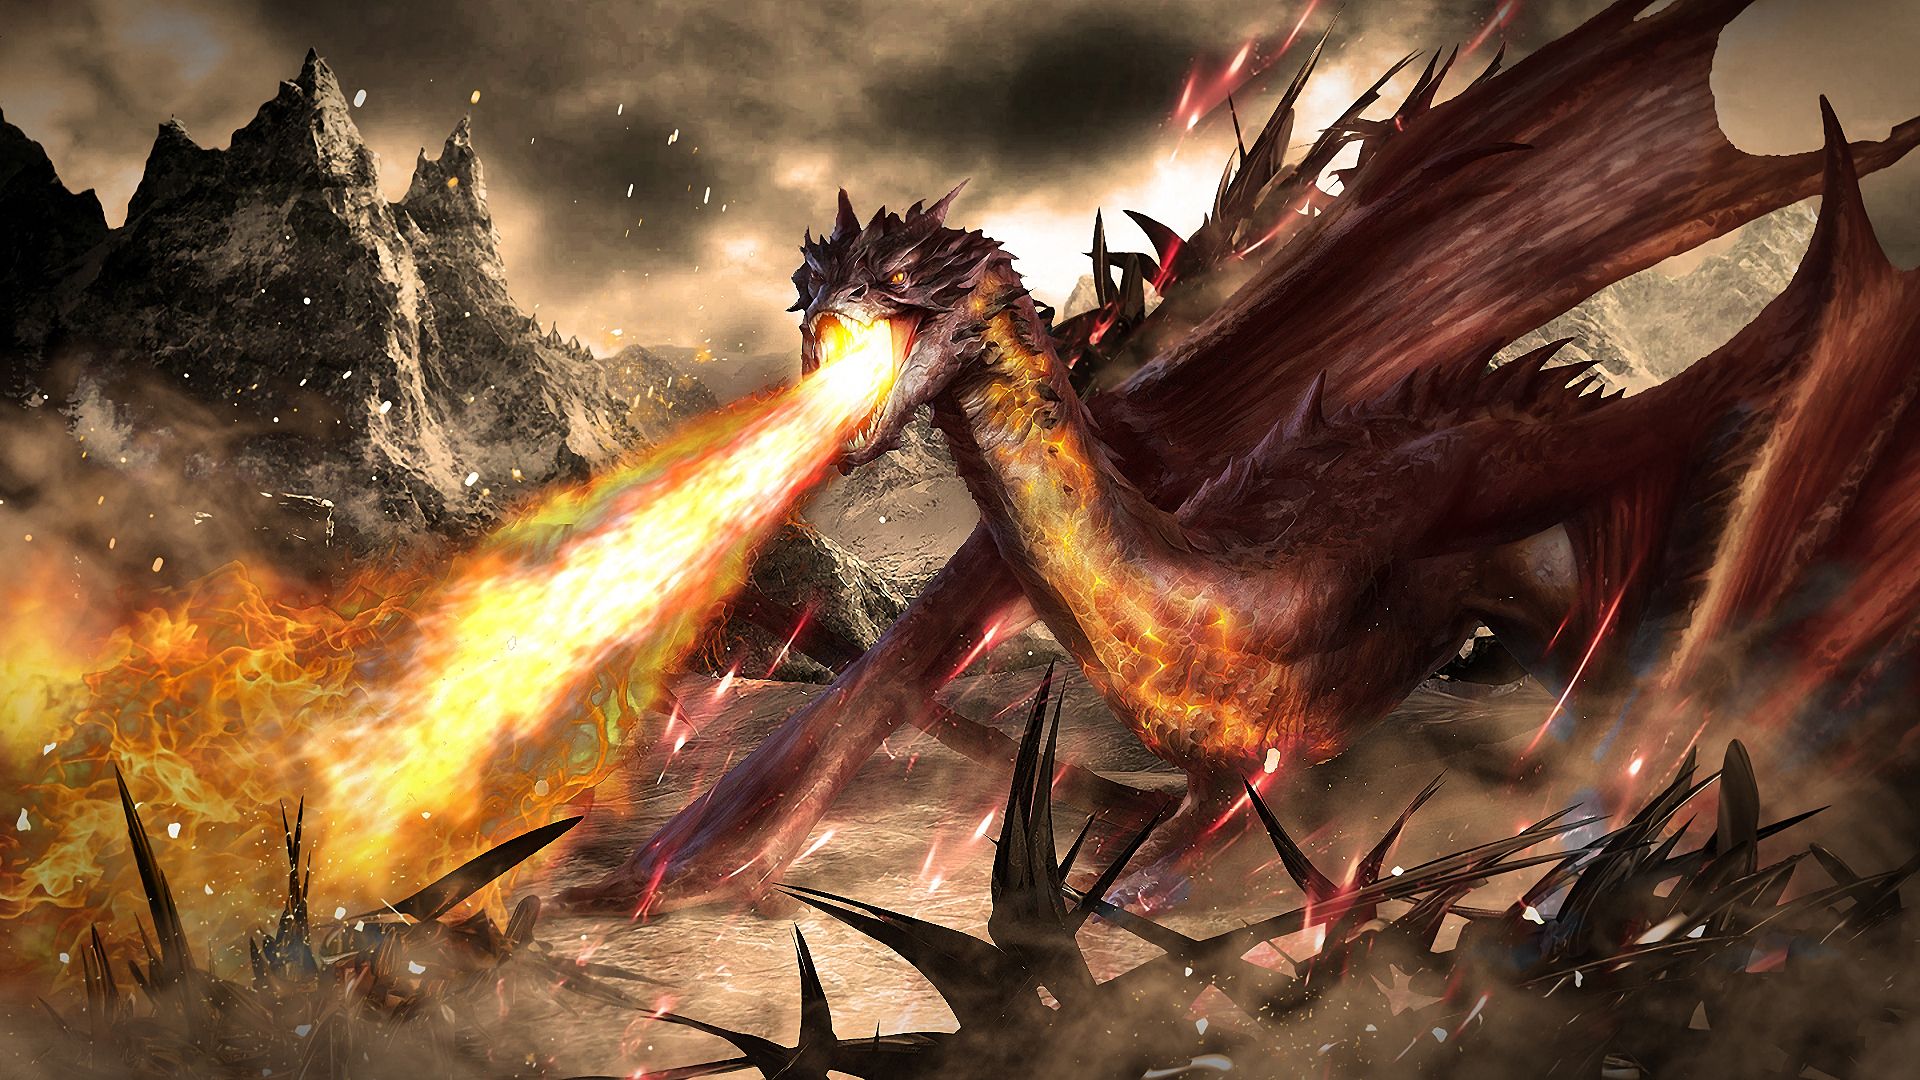 Smaug the Terrible 1920 x 1080 Wallpaper by skinny3829 on DeviantArt